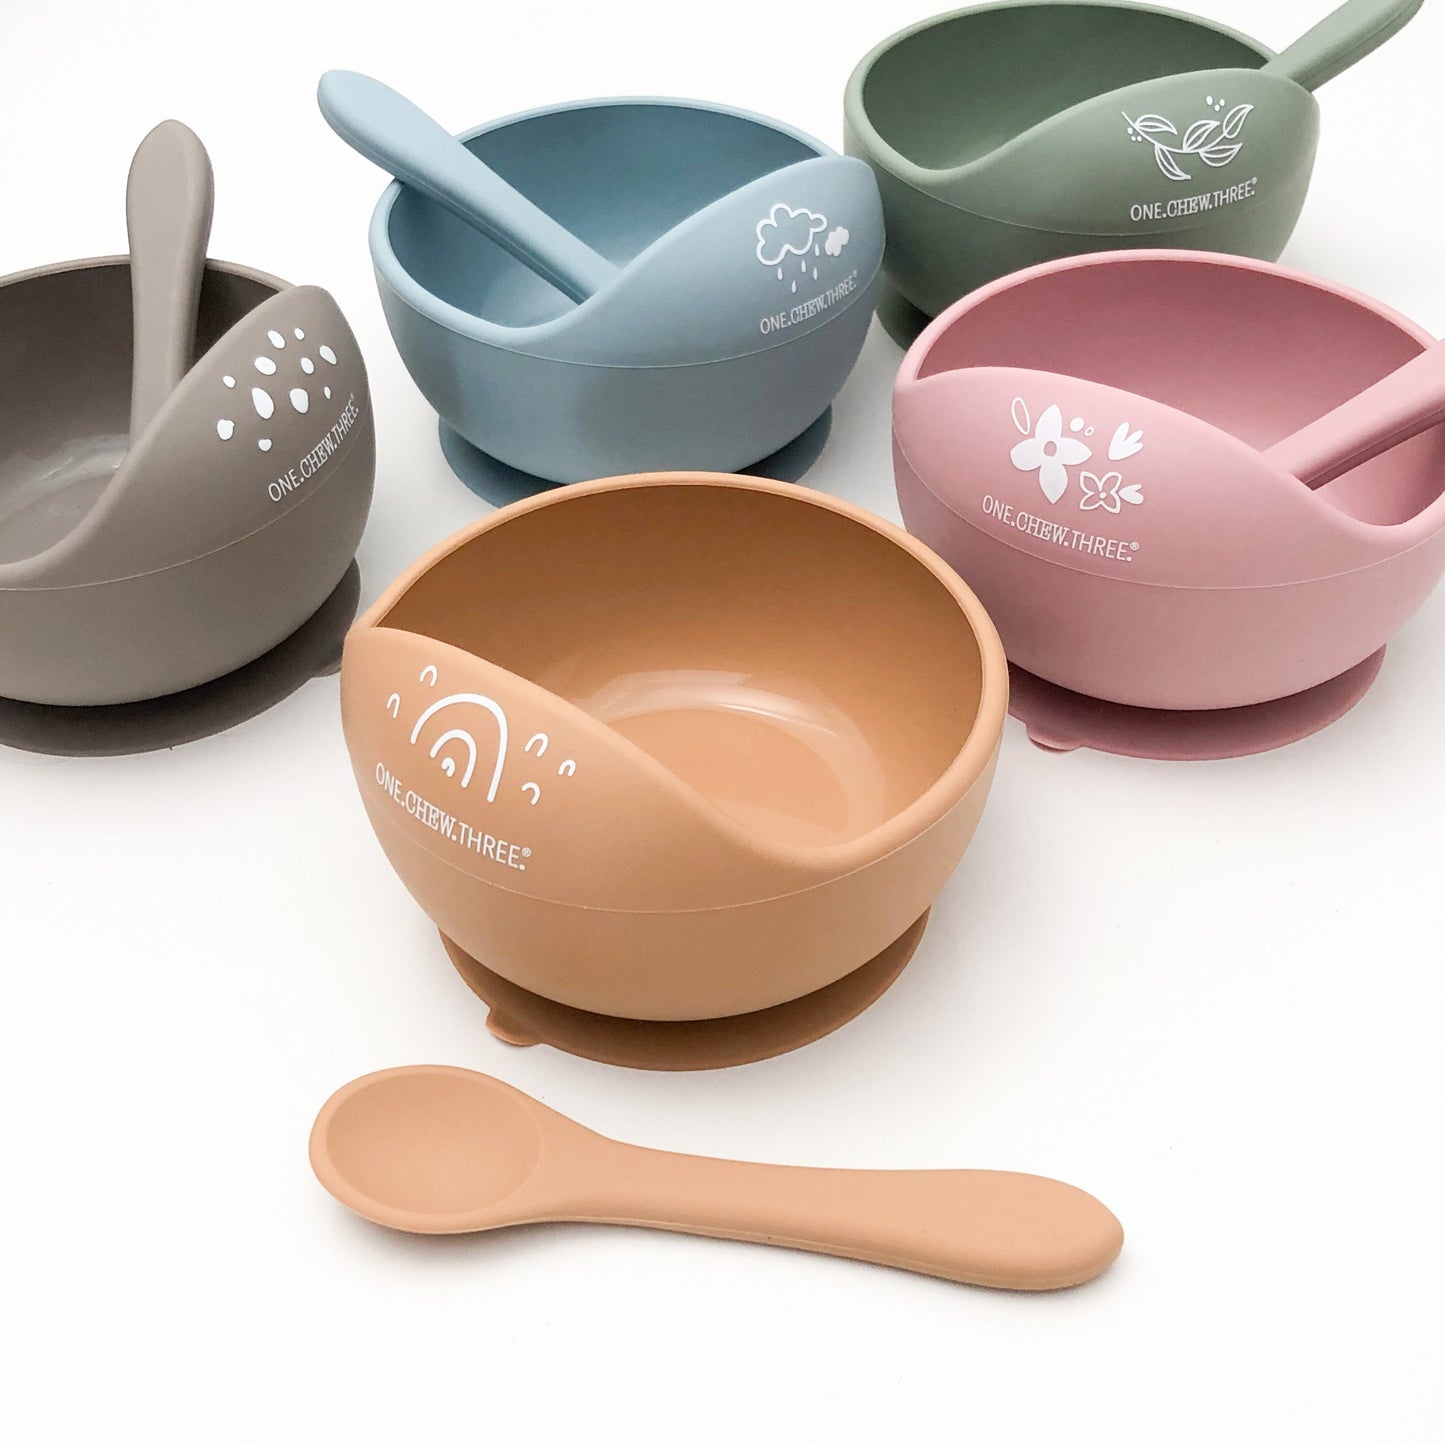 Silicone Scoop Bowl and Spoon Set - Caramel Rainbows